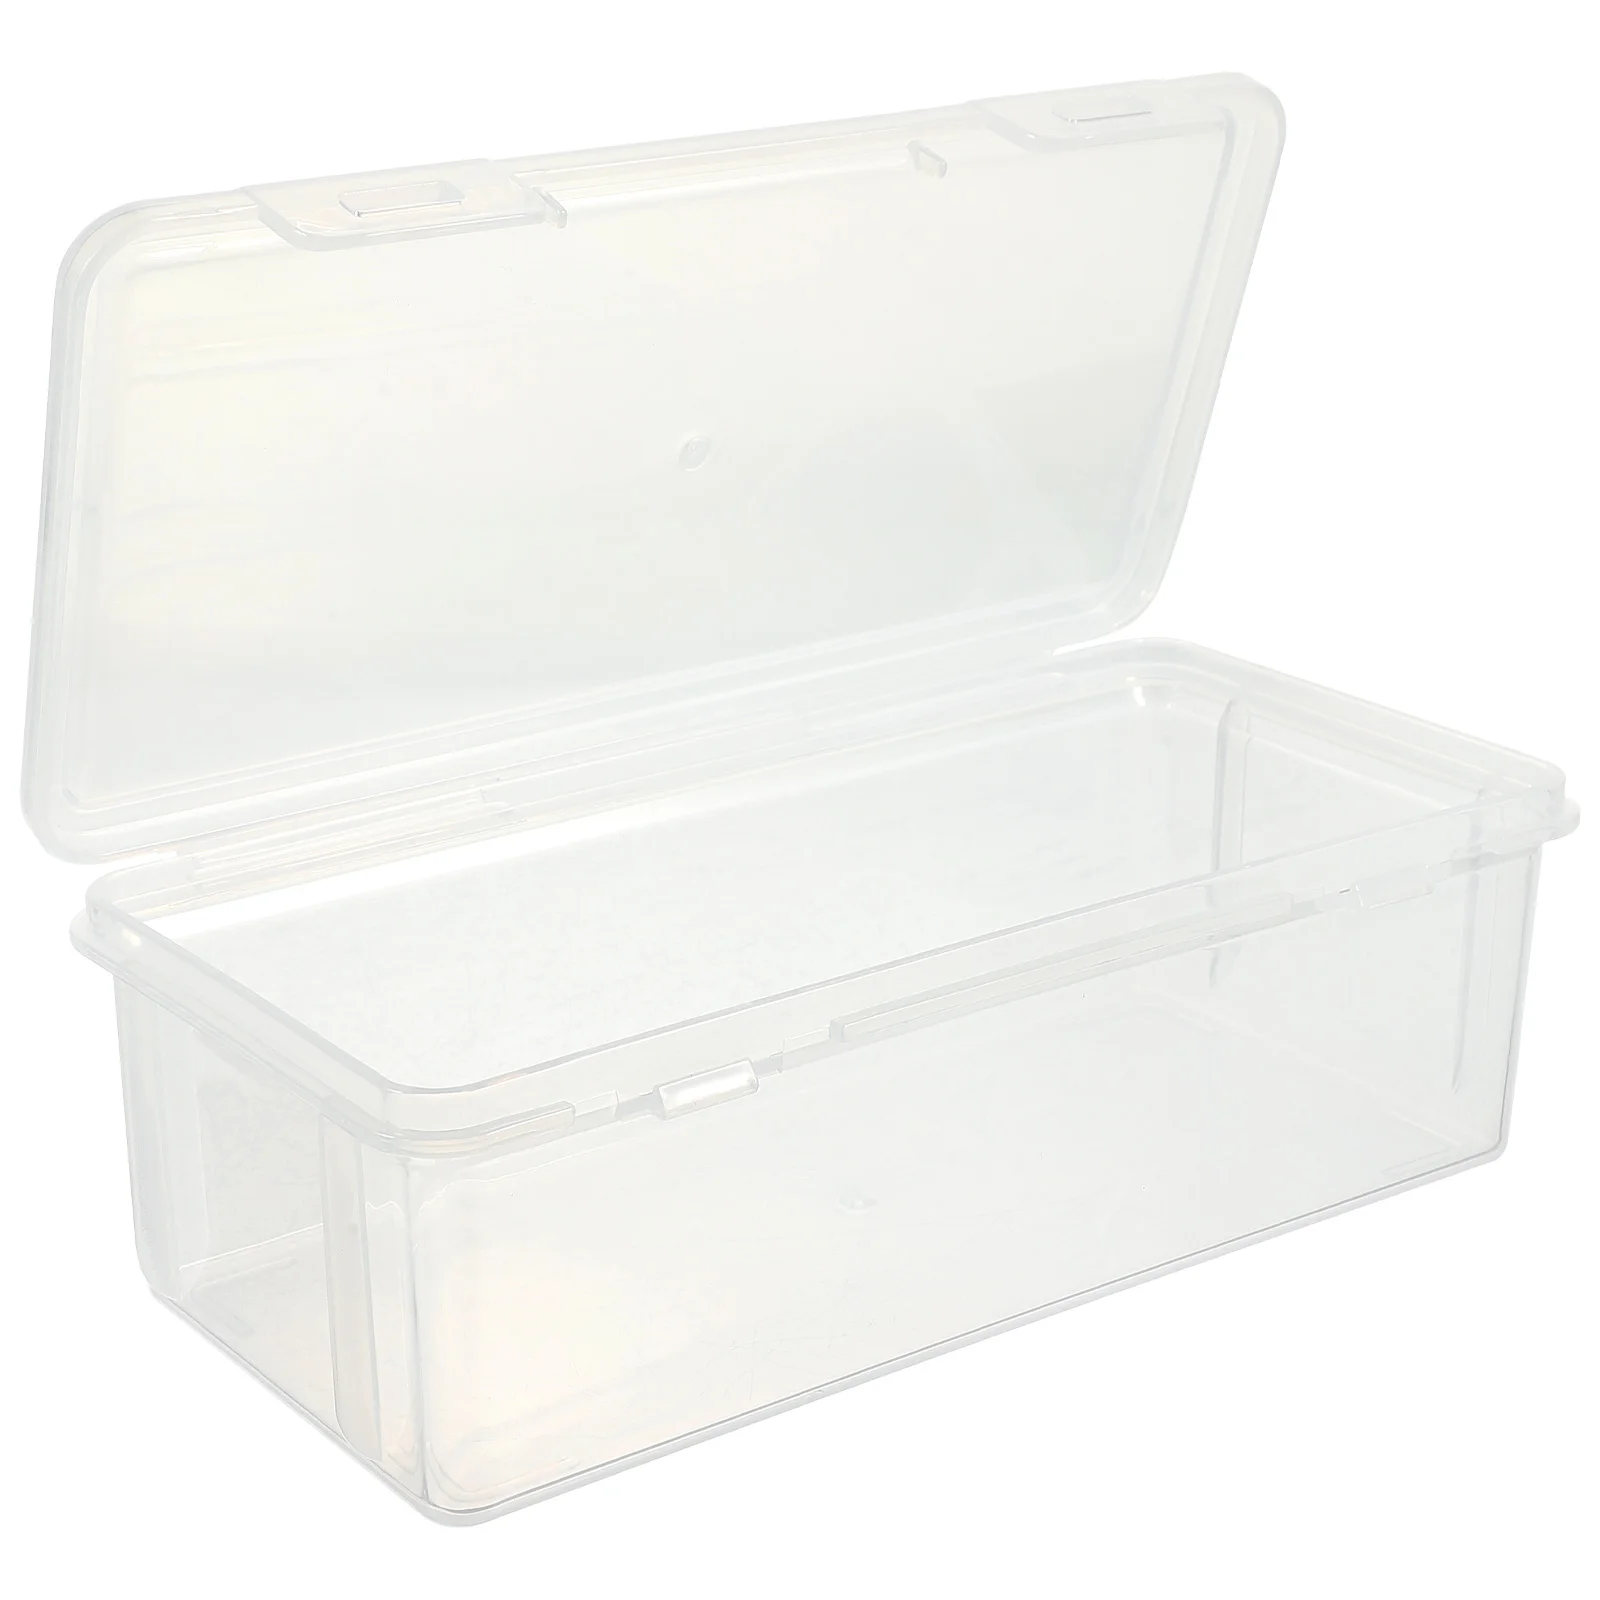 

Bread Toast Box Leakproof Bread Preservation Storage Container Crisper Convenient for Food (850ml)